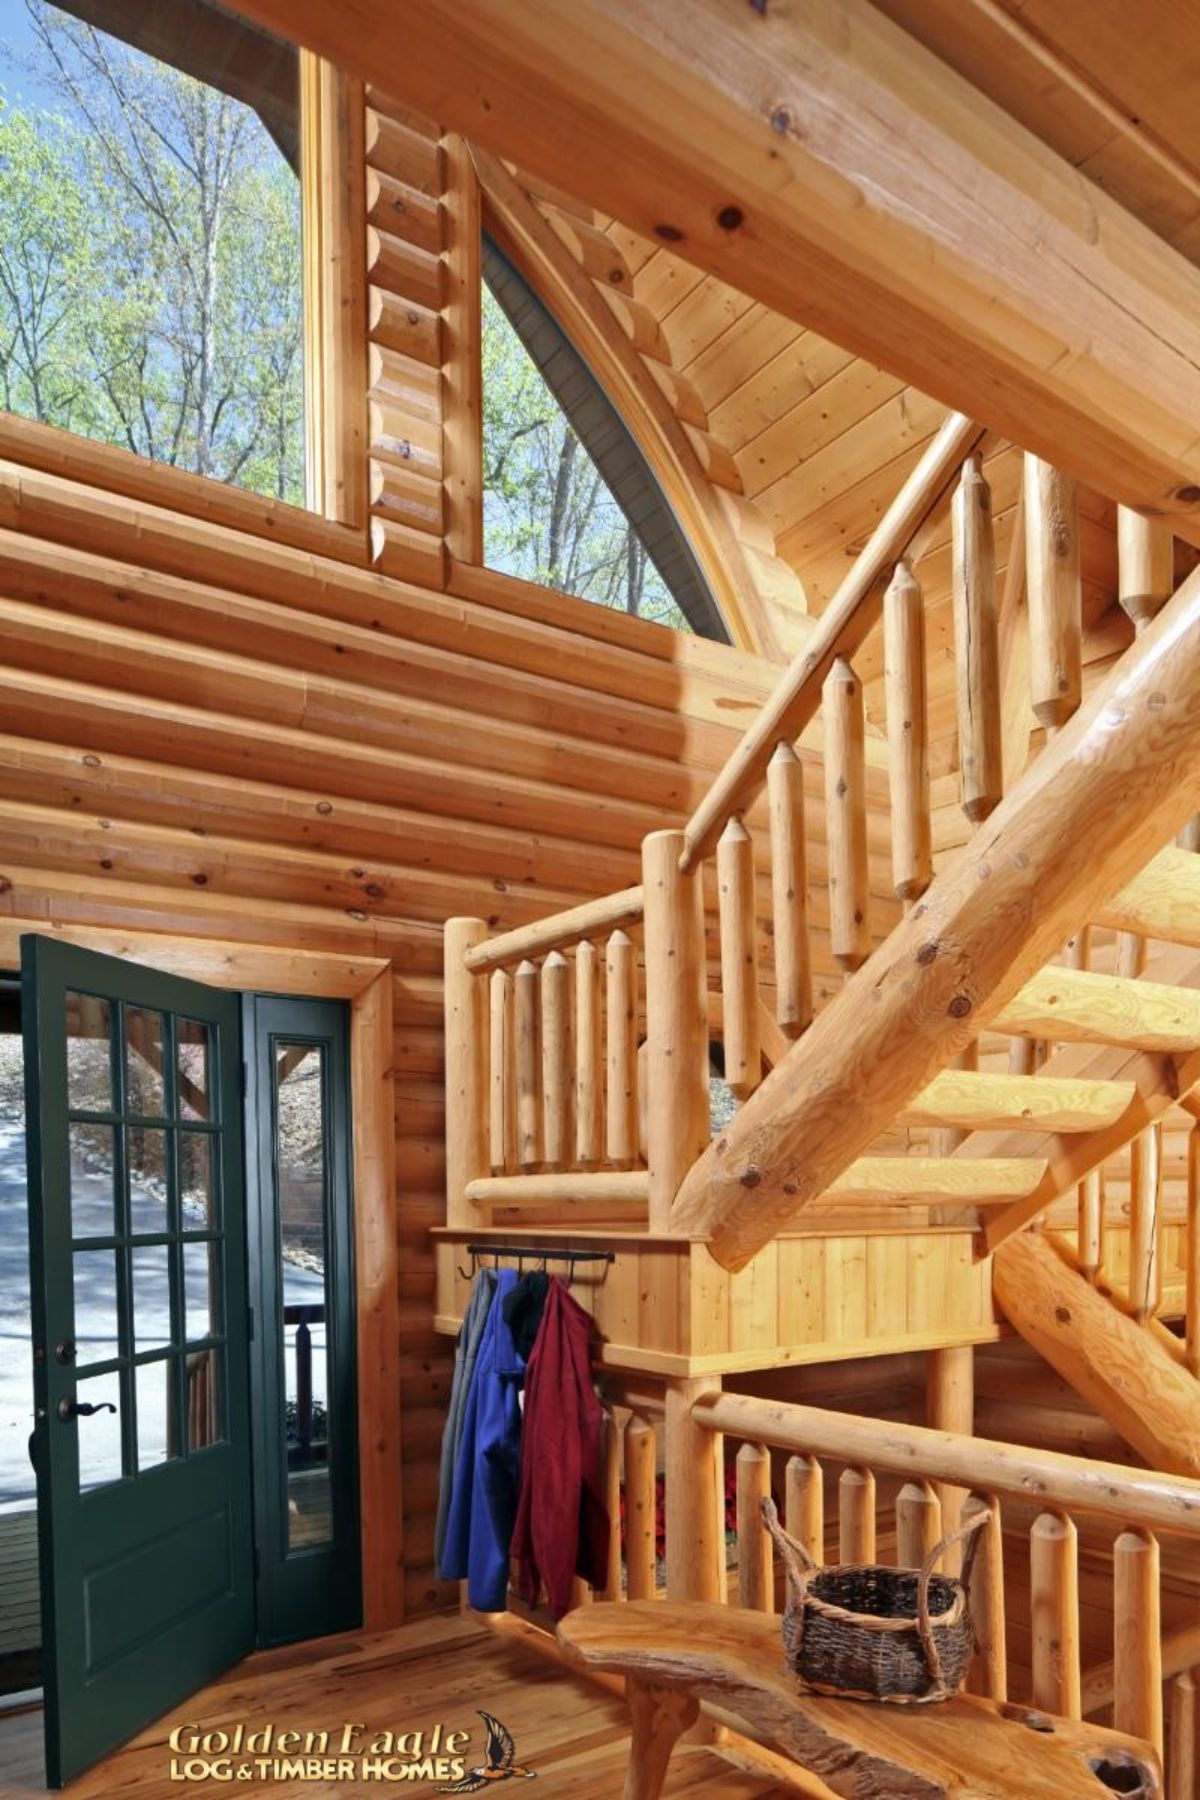 wood stair case with log railing inside log cabin with green door